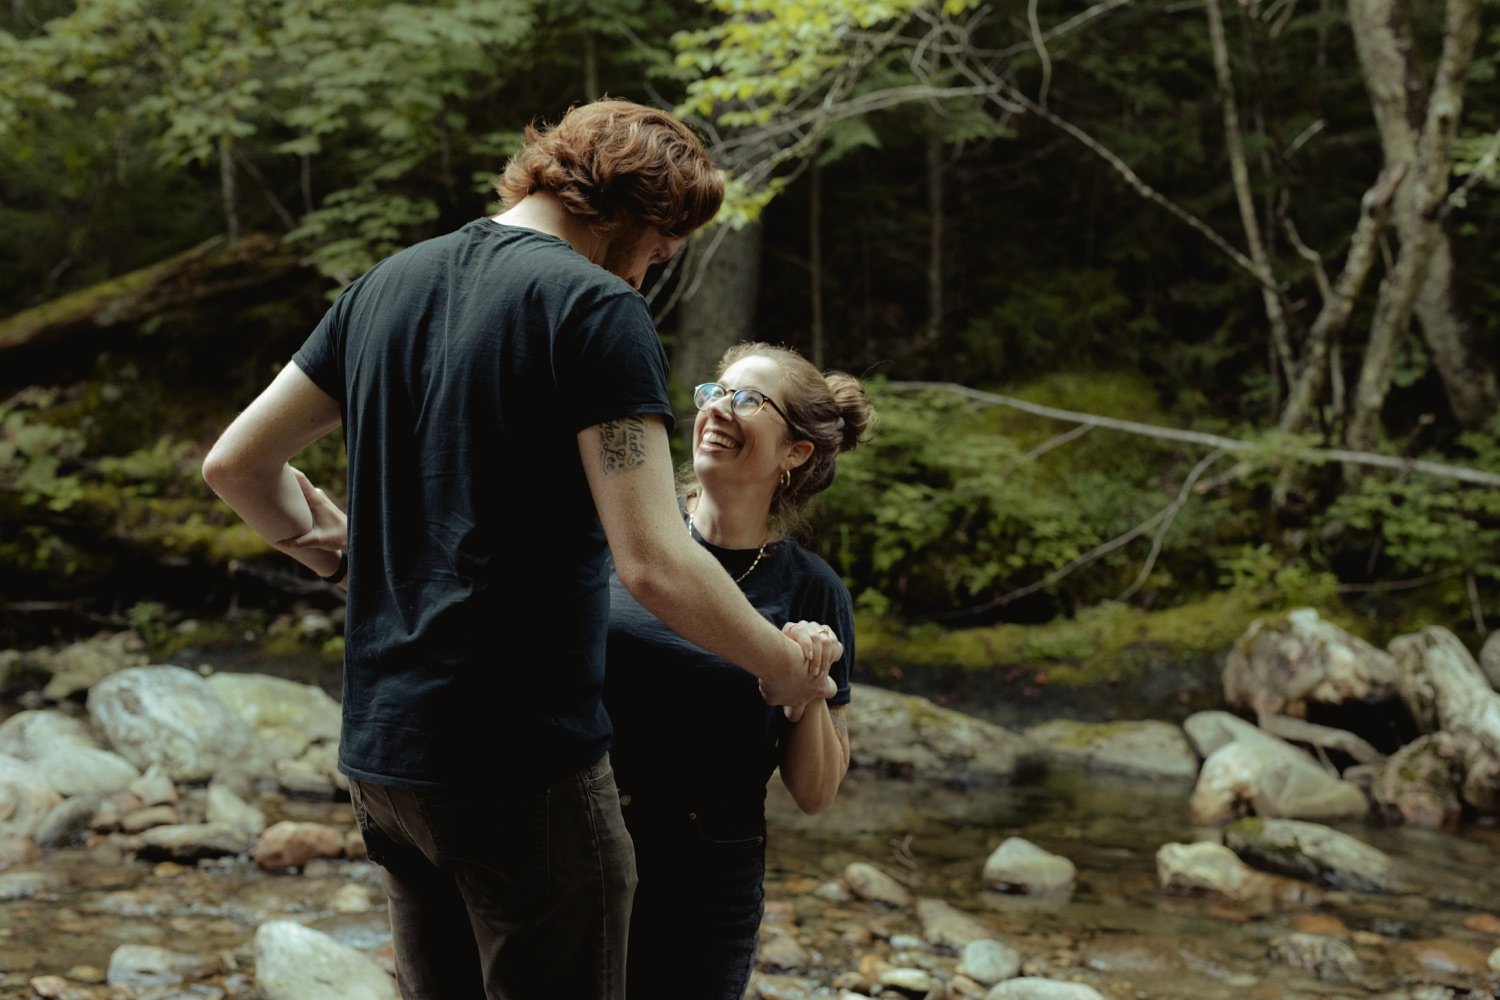 39_couple holding onto each other lovingly as they walk alongside rocky riverbed in hancock vermont .jpg